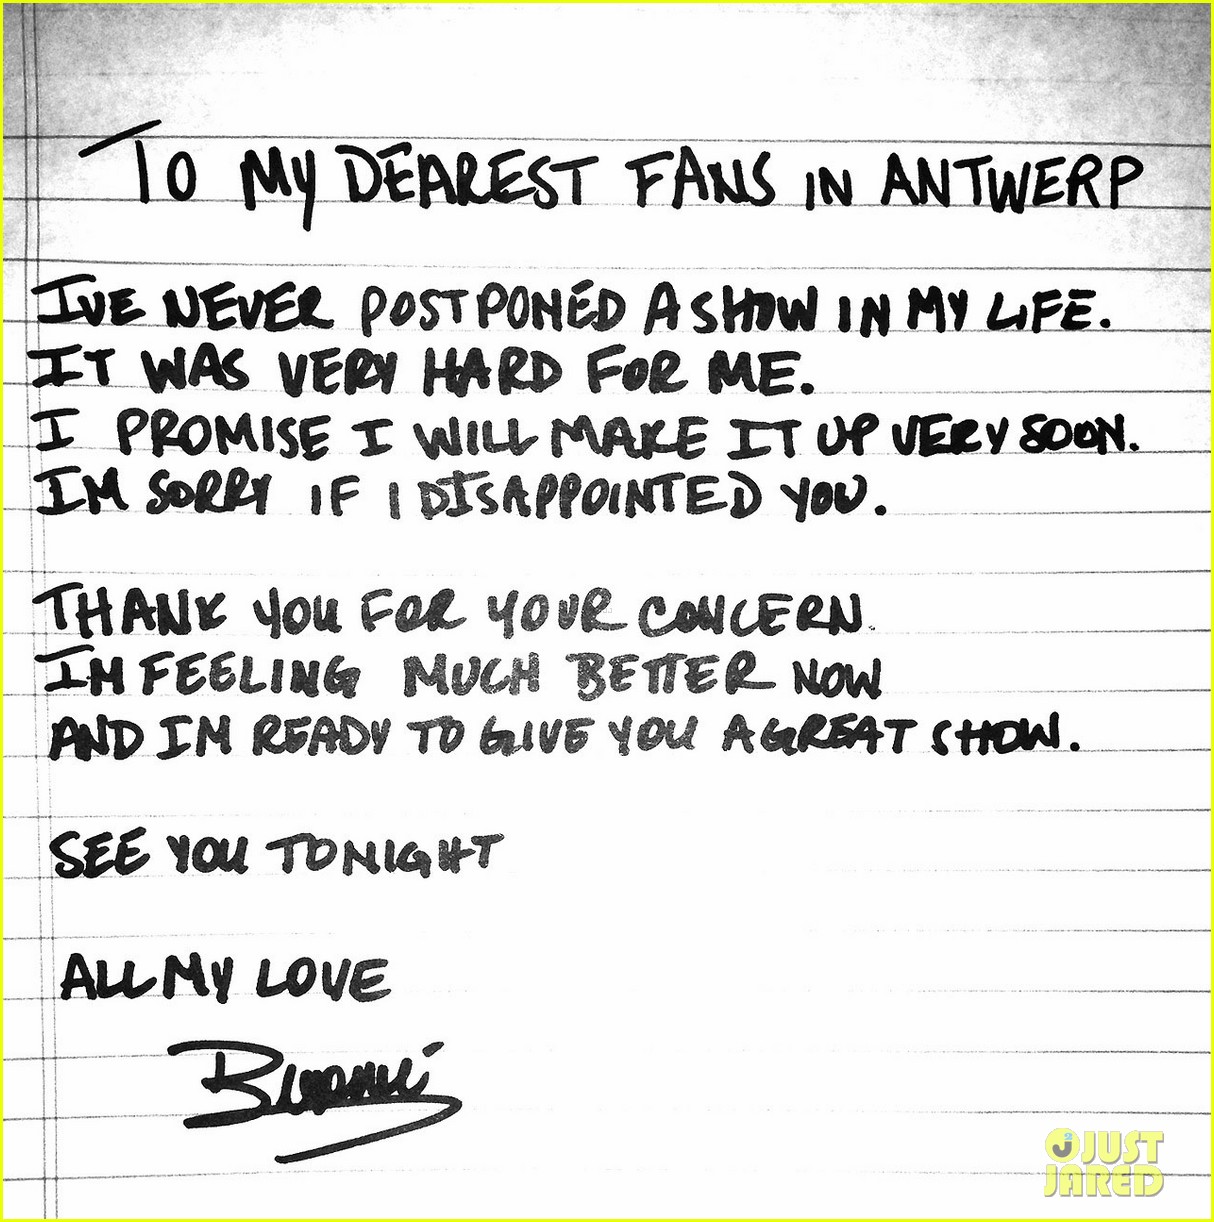 beyonce writes handwritten note after cancelled concert 01